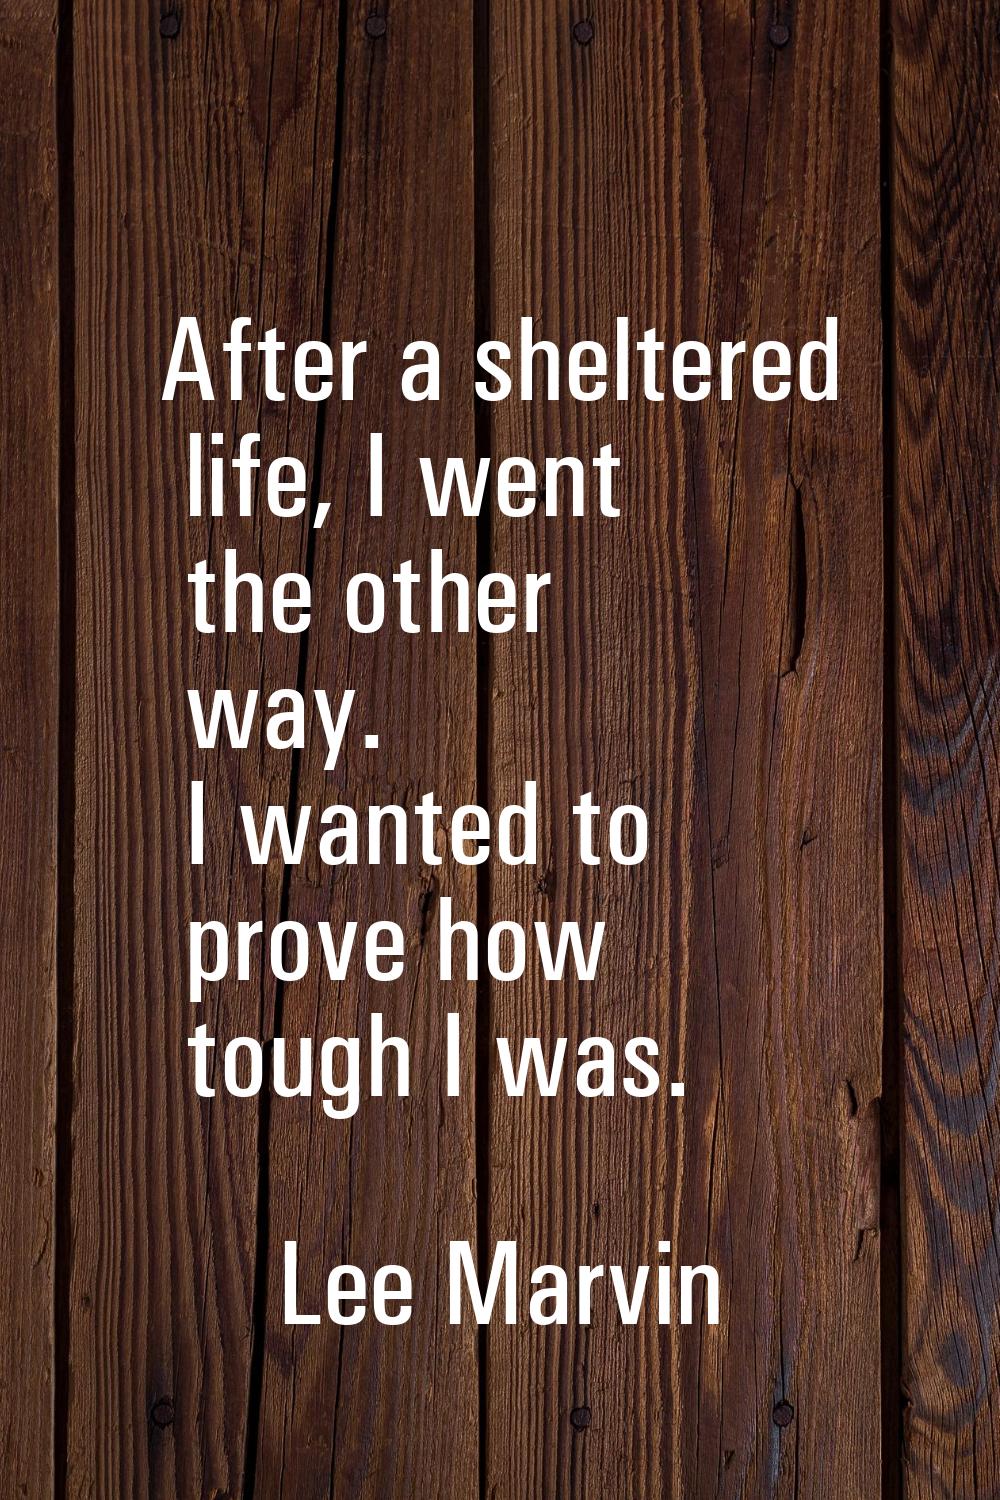 After a sheltered life, I went the other way. I wanted to prove how tough I was.